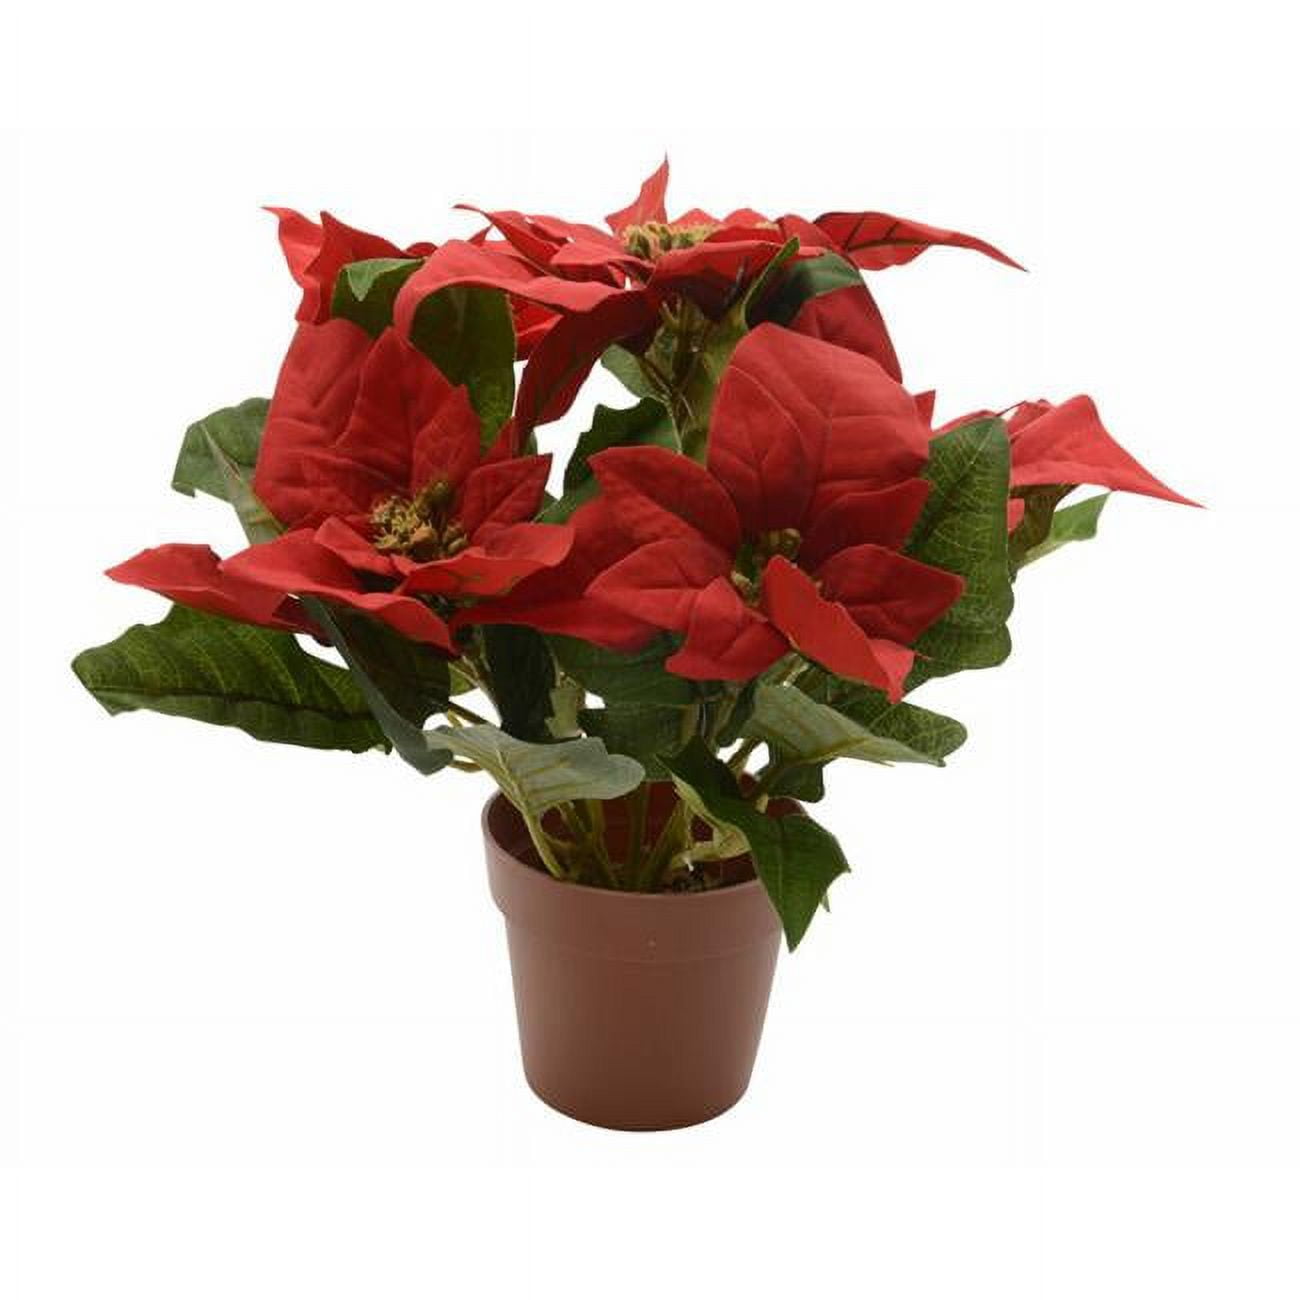 Picture of Decoris 9016499 Silk Potted Poinsettia Christmas Decoration, Red - Case of 12